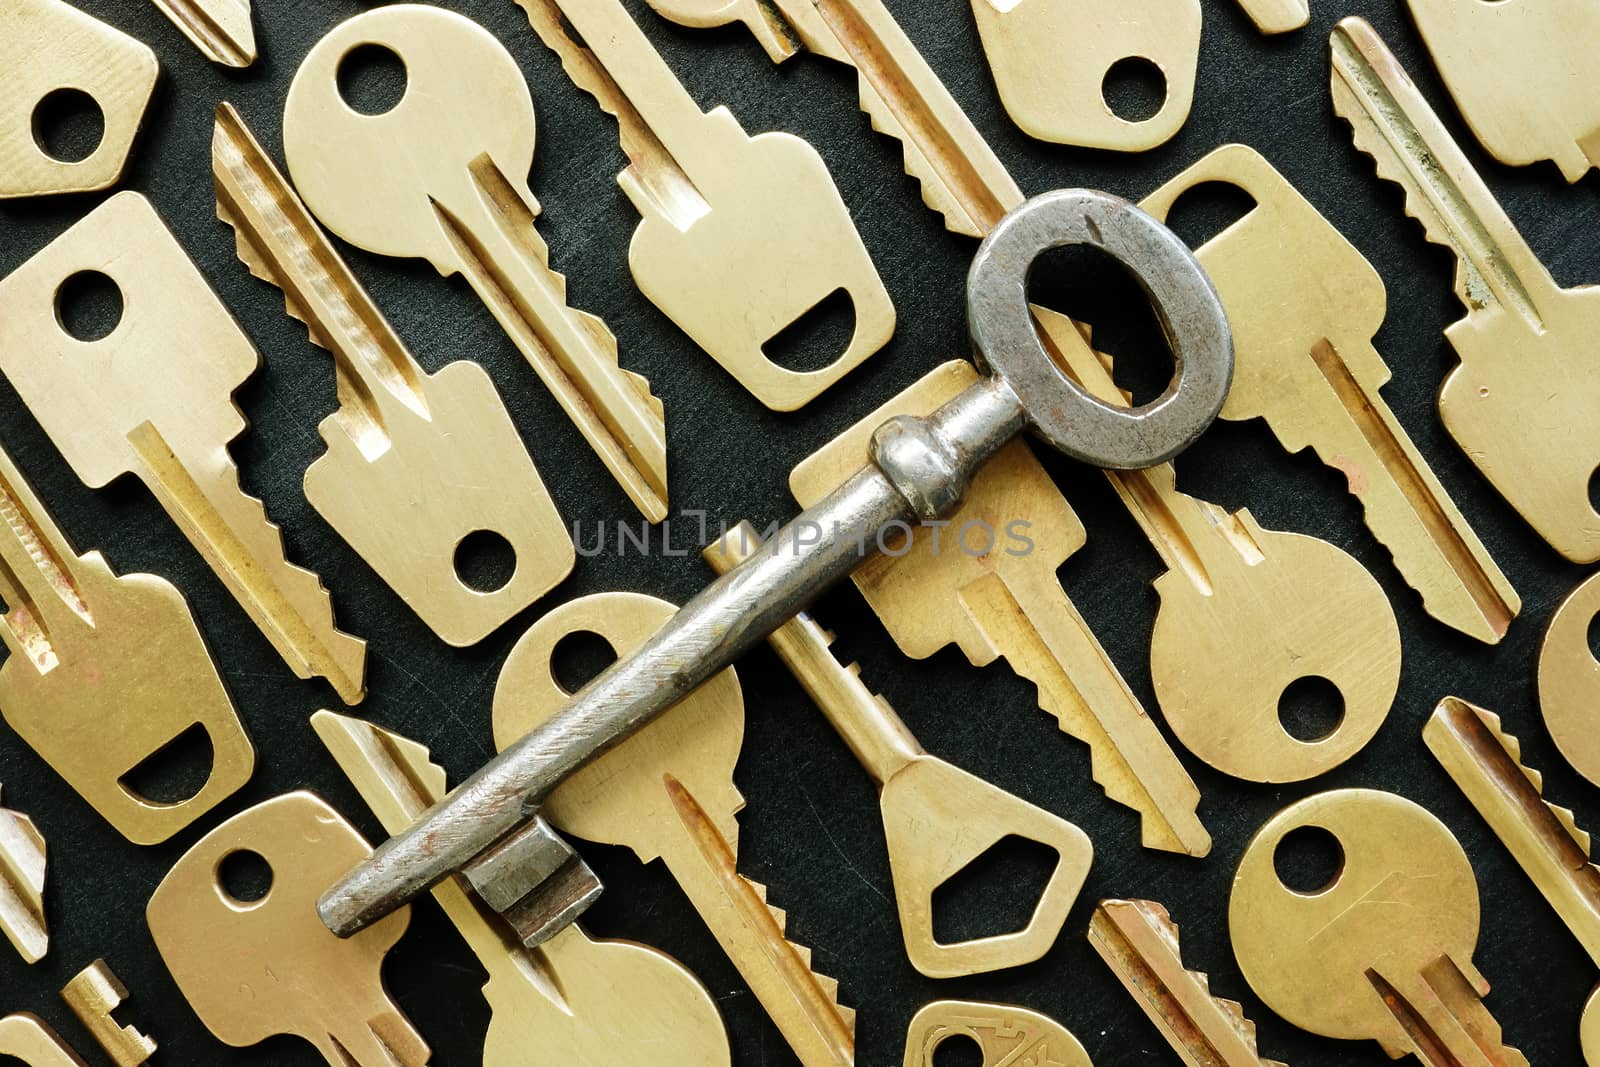 Old metal key and many yellow ones as symbol of right decision or find the key.